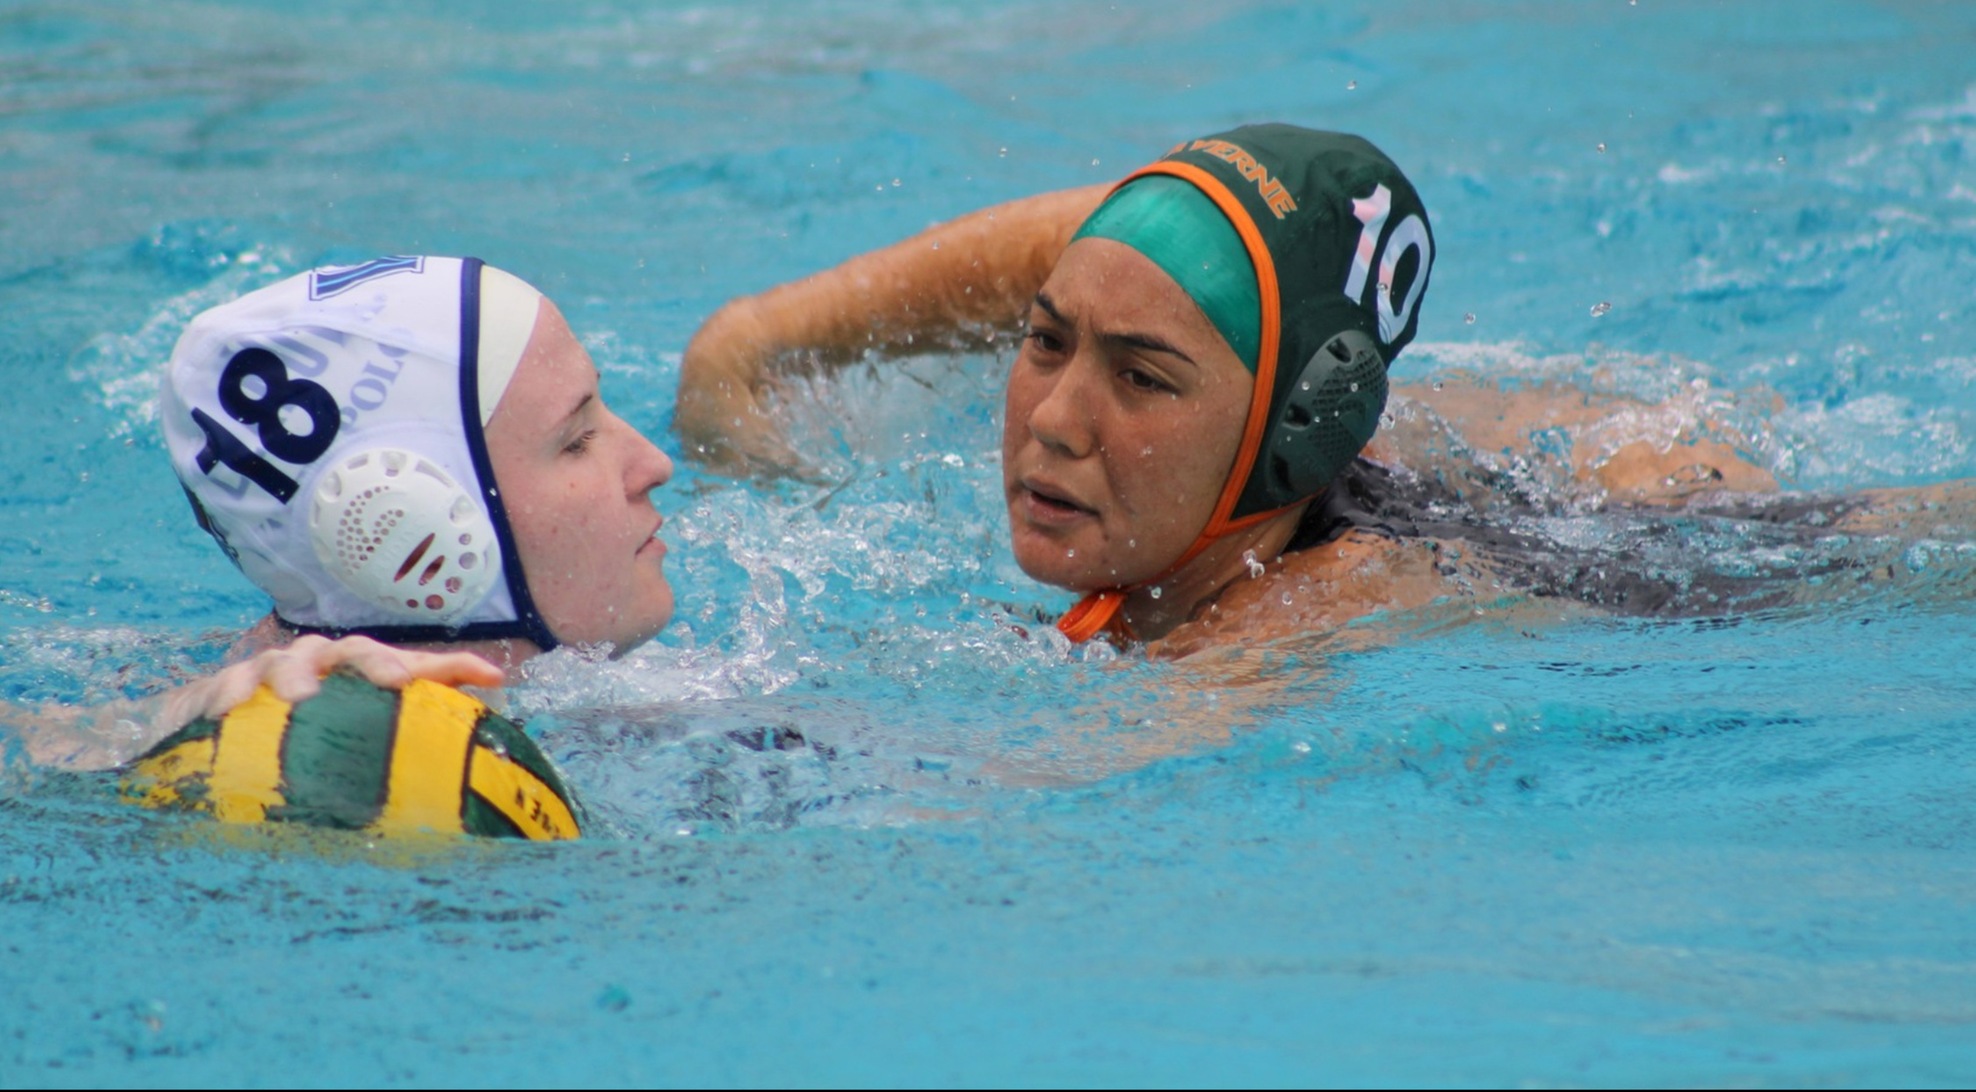 Women's Water Polo adds home game against Washington and Jefferson